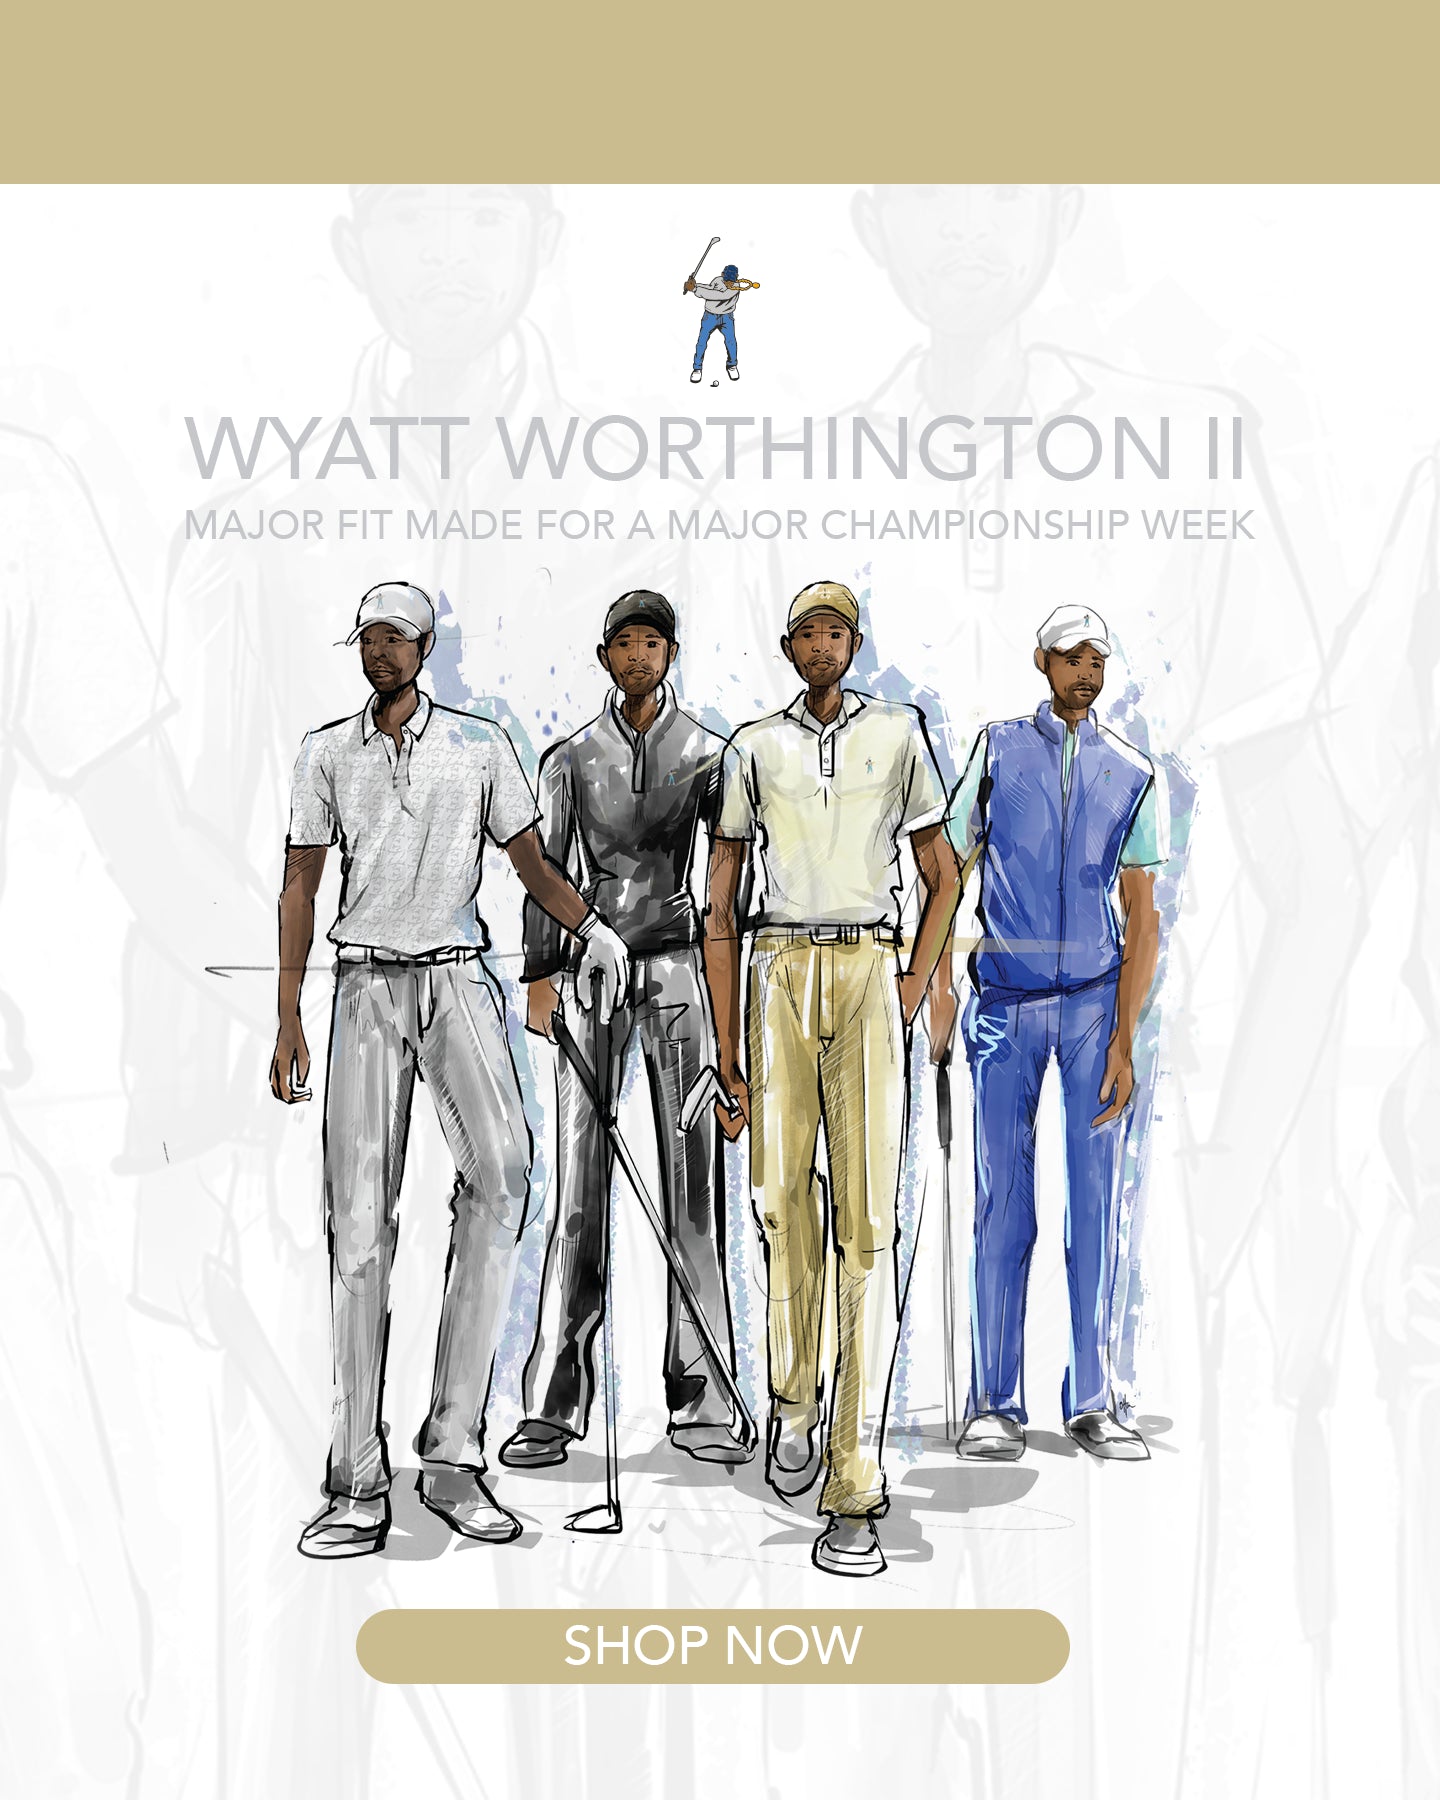 Wyatt Worthington 11. Major fit made for a major championship week. Click to Shop Now.